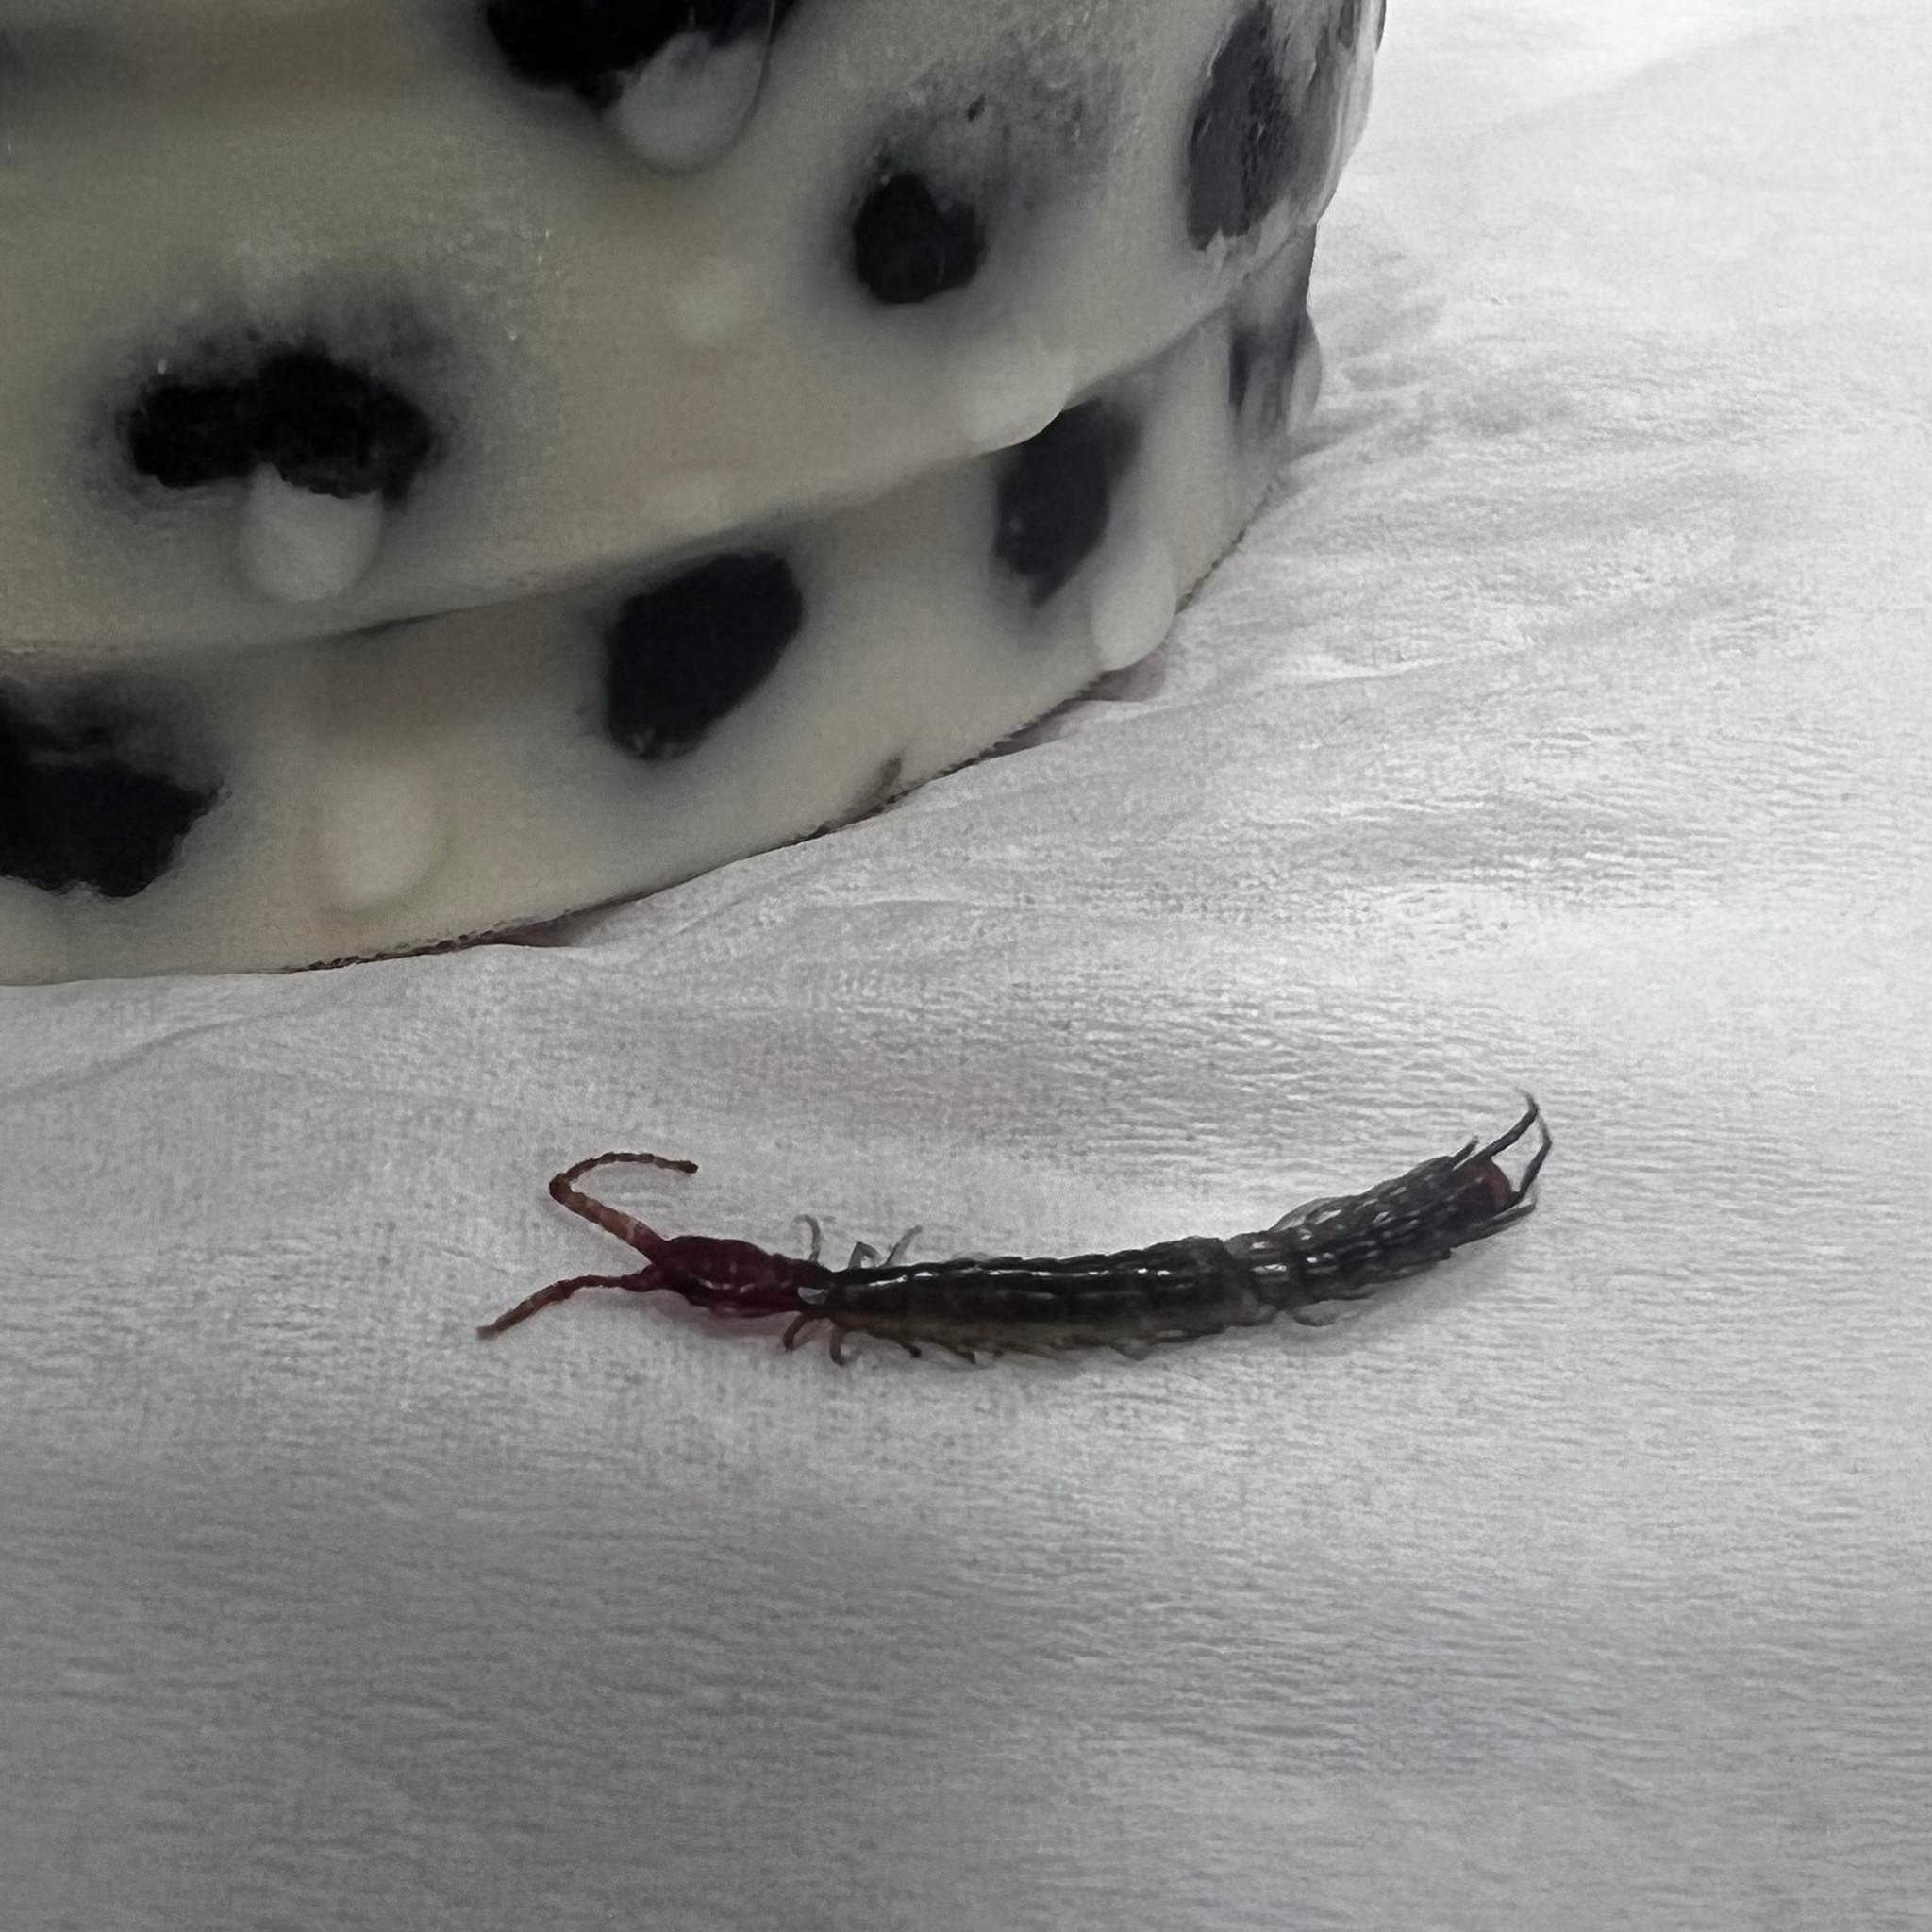 S'porean woman in shock after spitting out centipede from her bubble tea drink | weirdkaya